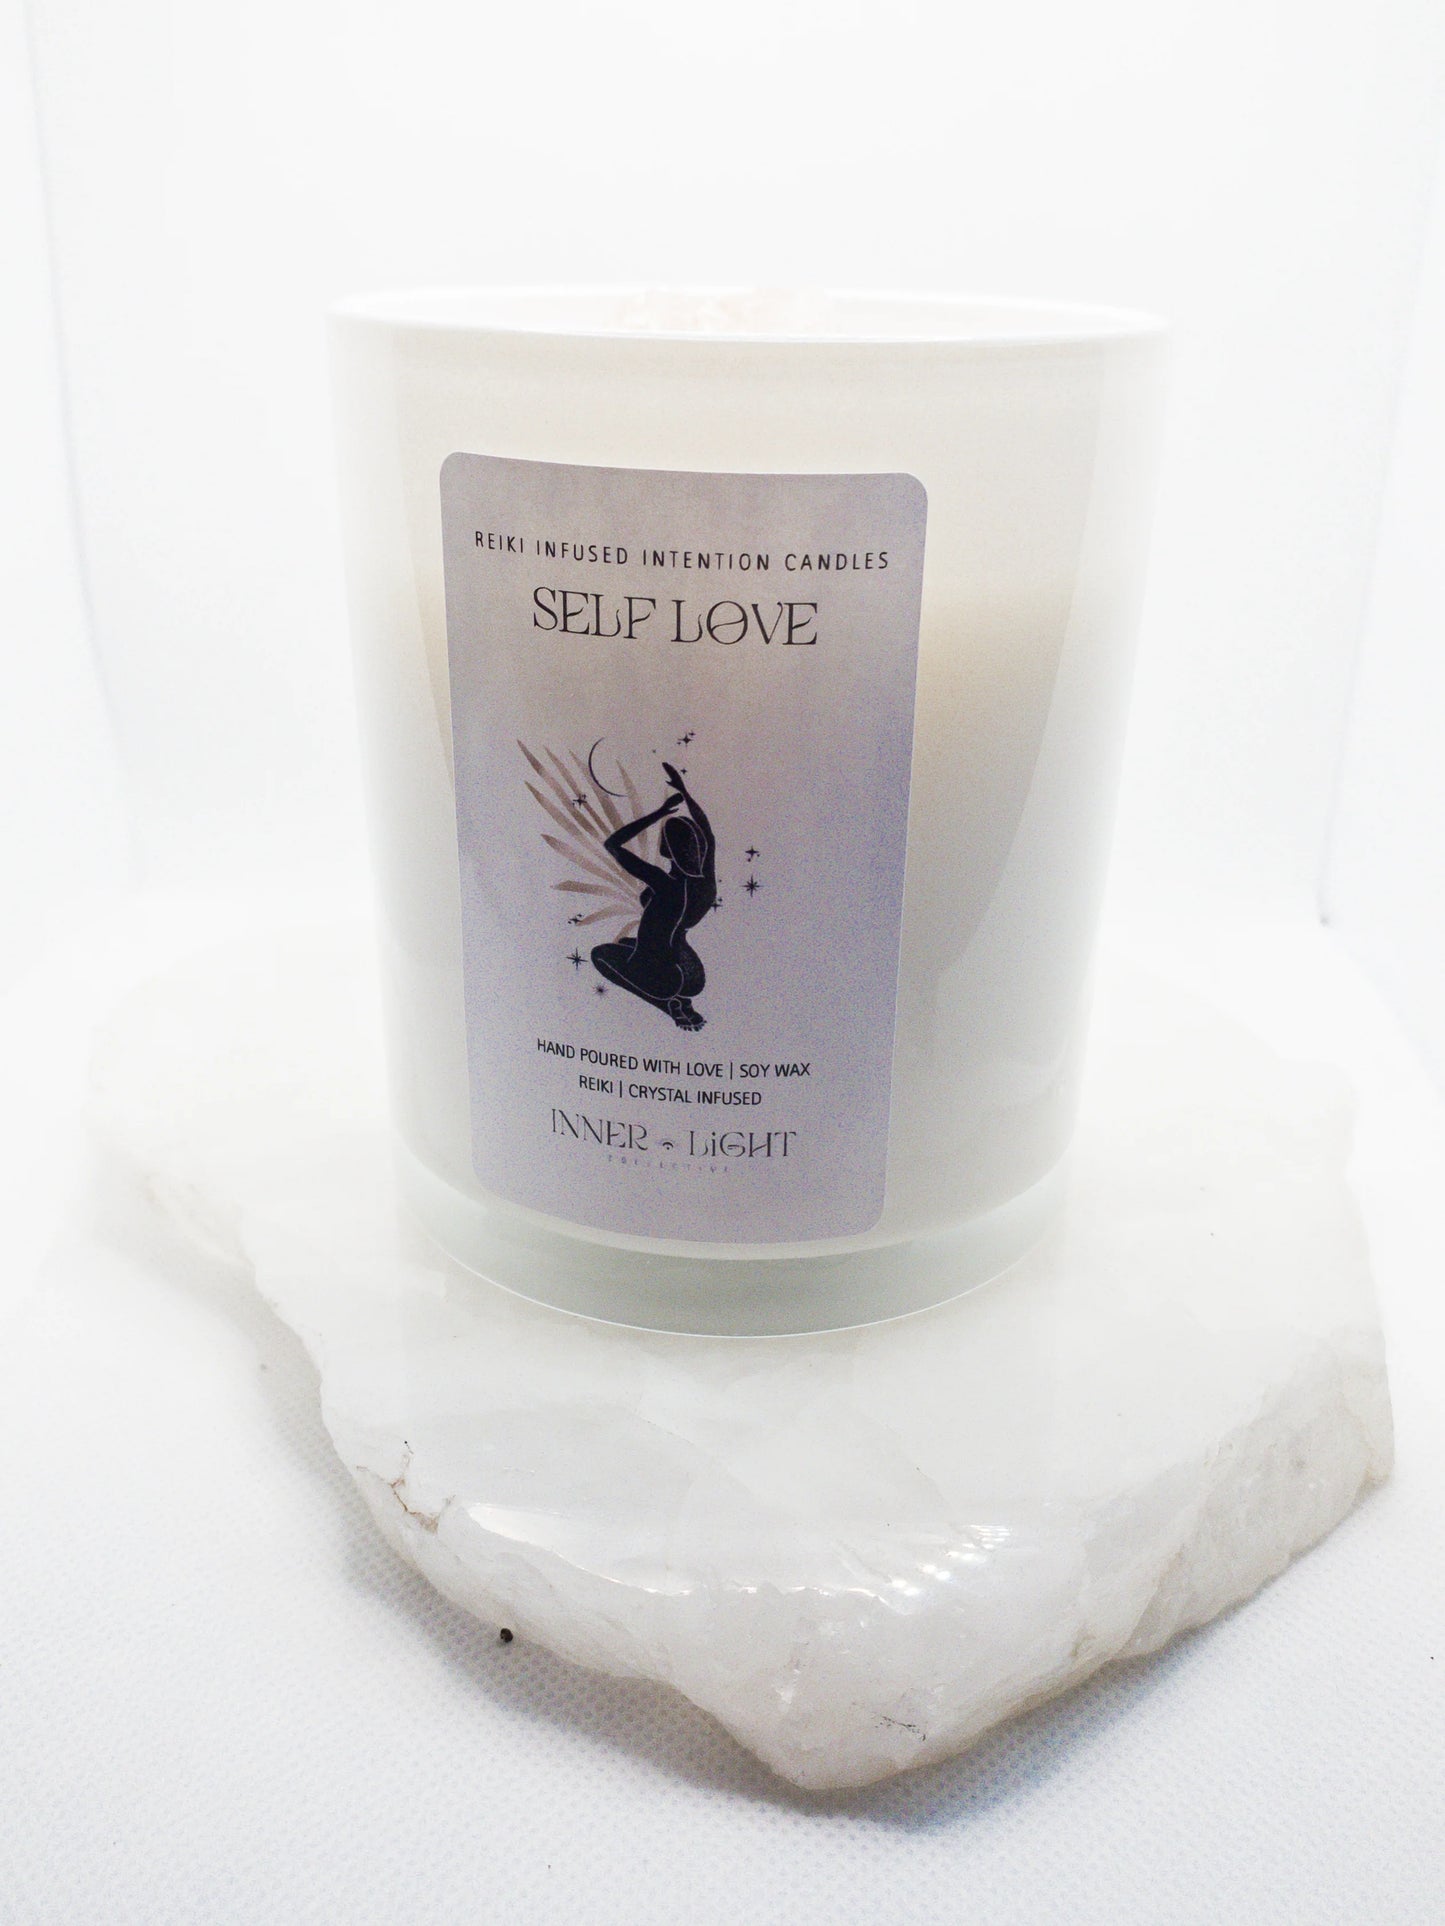 ‘Self Love’ - Reiki + Crystal Infused Candle ~ Indulge In This Large Rose Quartz Infused Candle